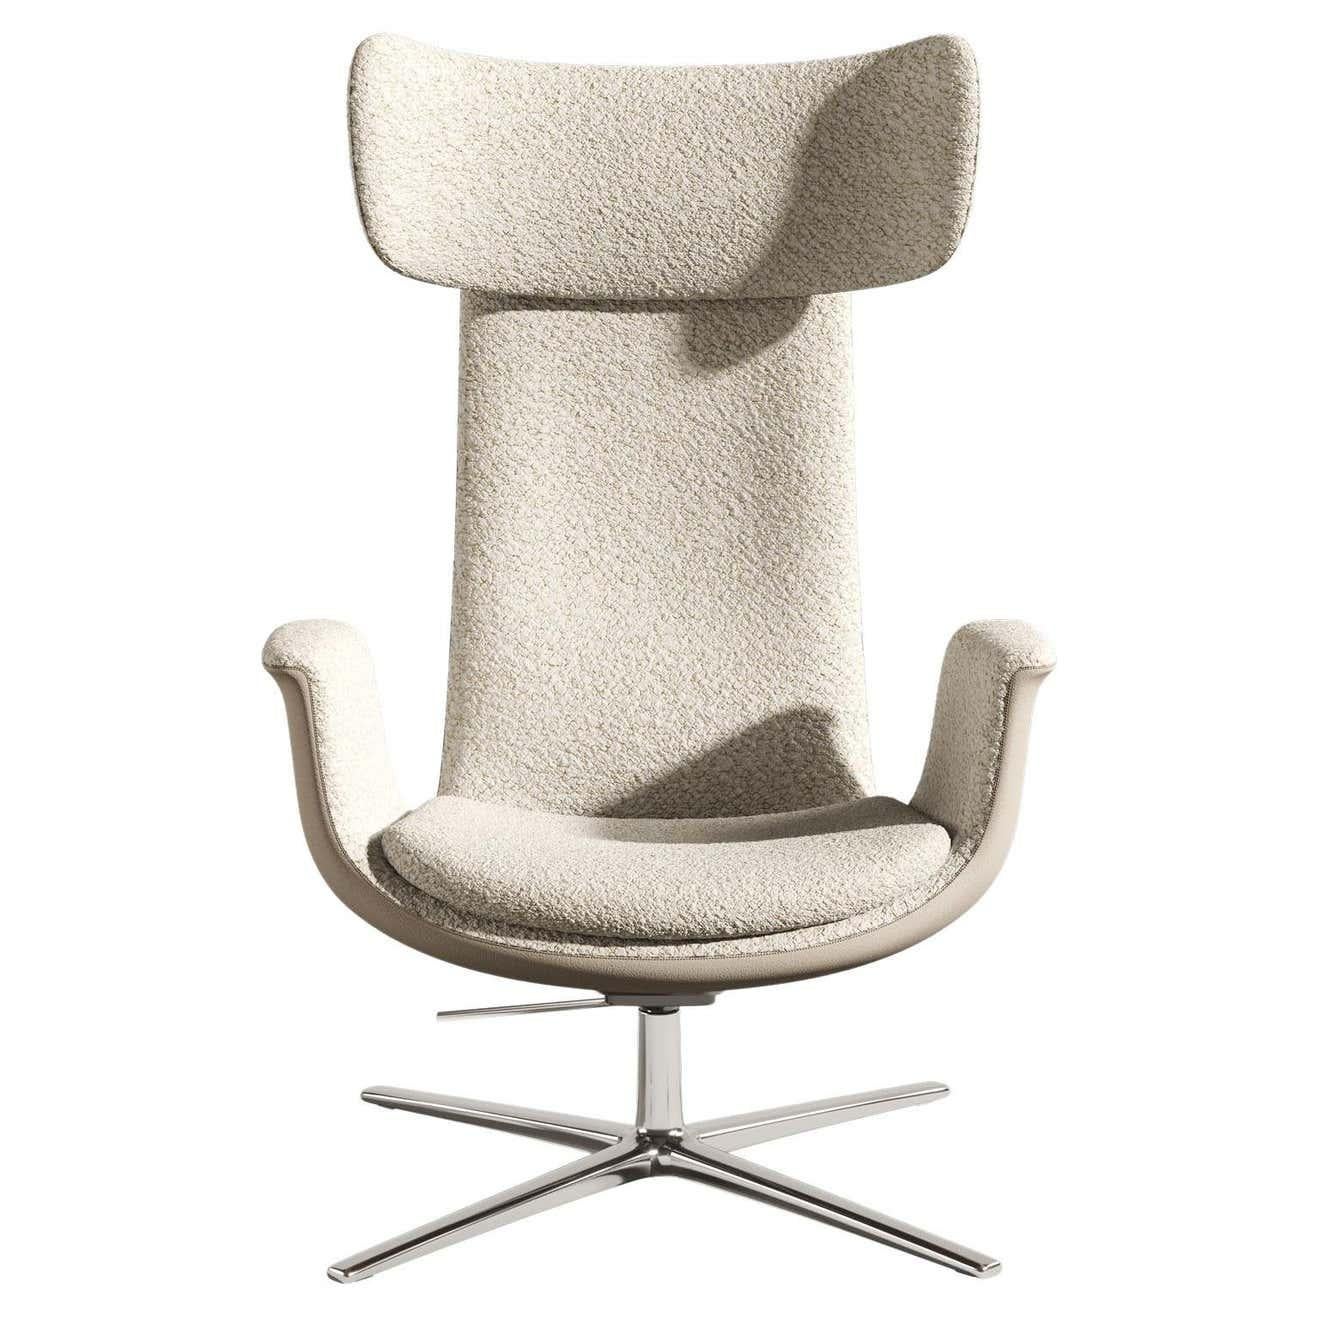 White Odyssey Armchair Adjustable Headrest Leather & Fabric Finish For Sale